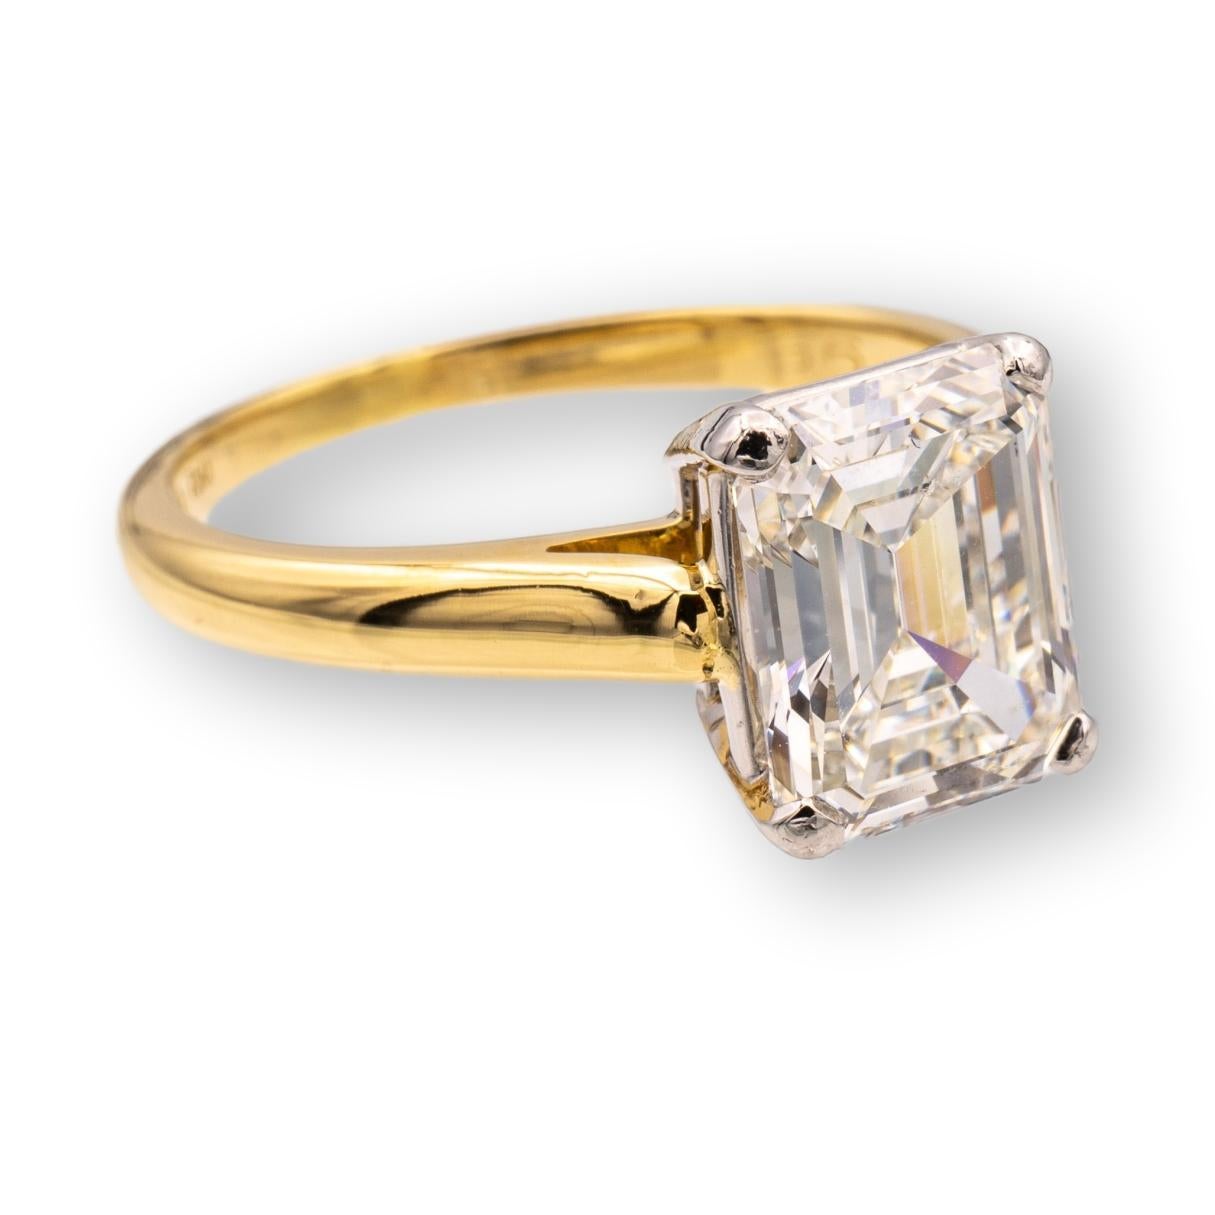 Tiffany & Co. vintage engagement ring finely crafted in 18 karat yellow gold and four prong platinum basket featuring an Emerald cut diamond center weighing 2.04 carats, I color VVS2 clarity. Accompanied by a Tiffany certificate.

RING